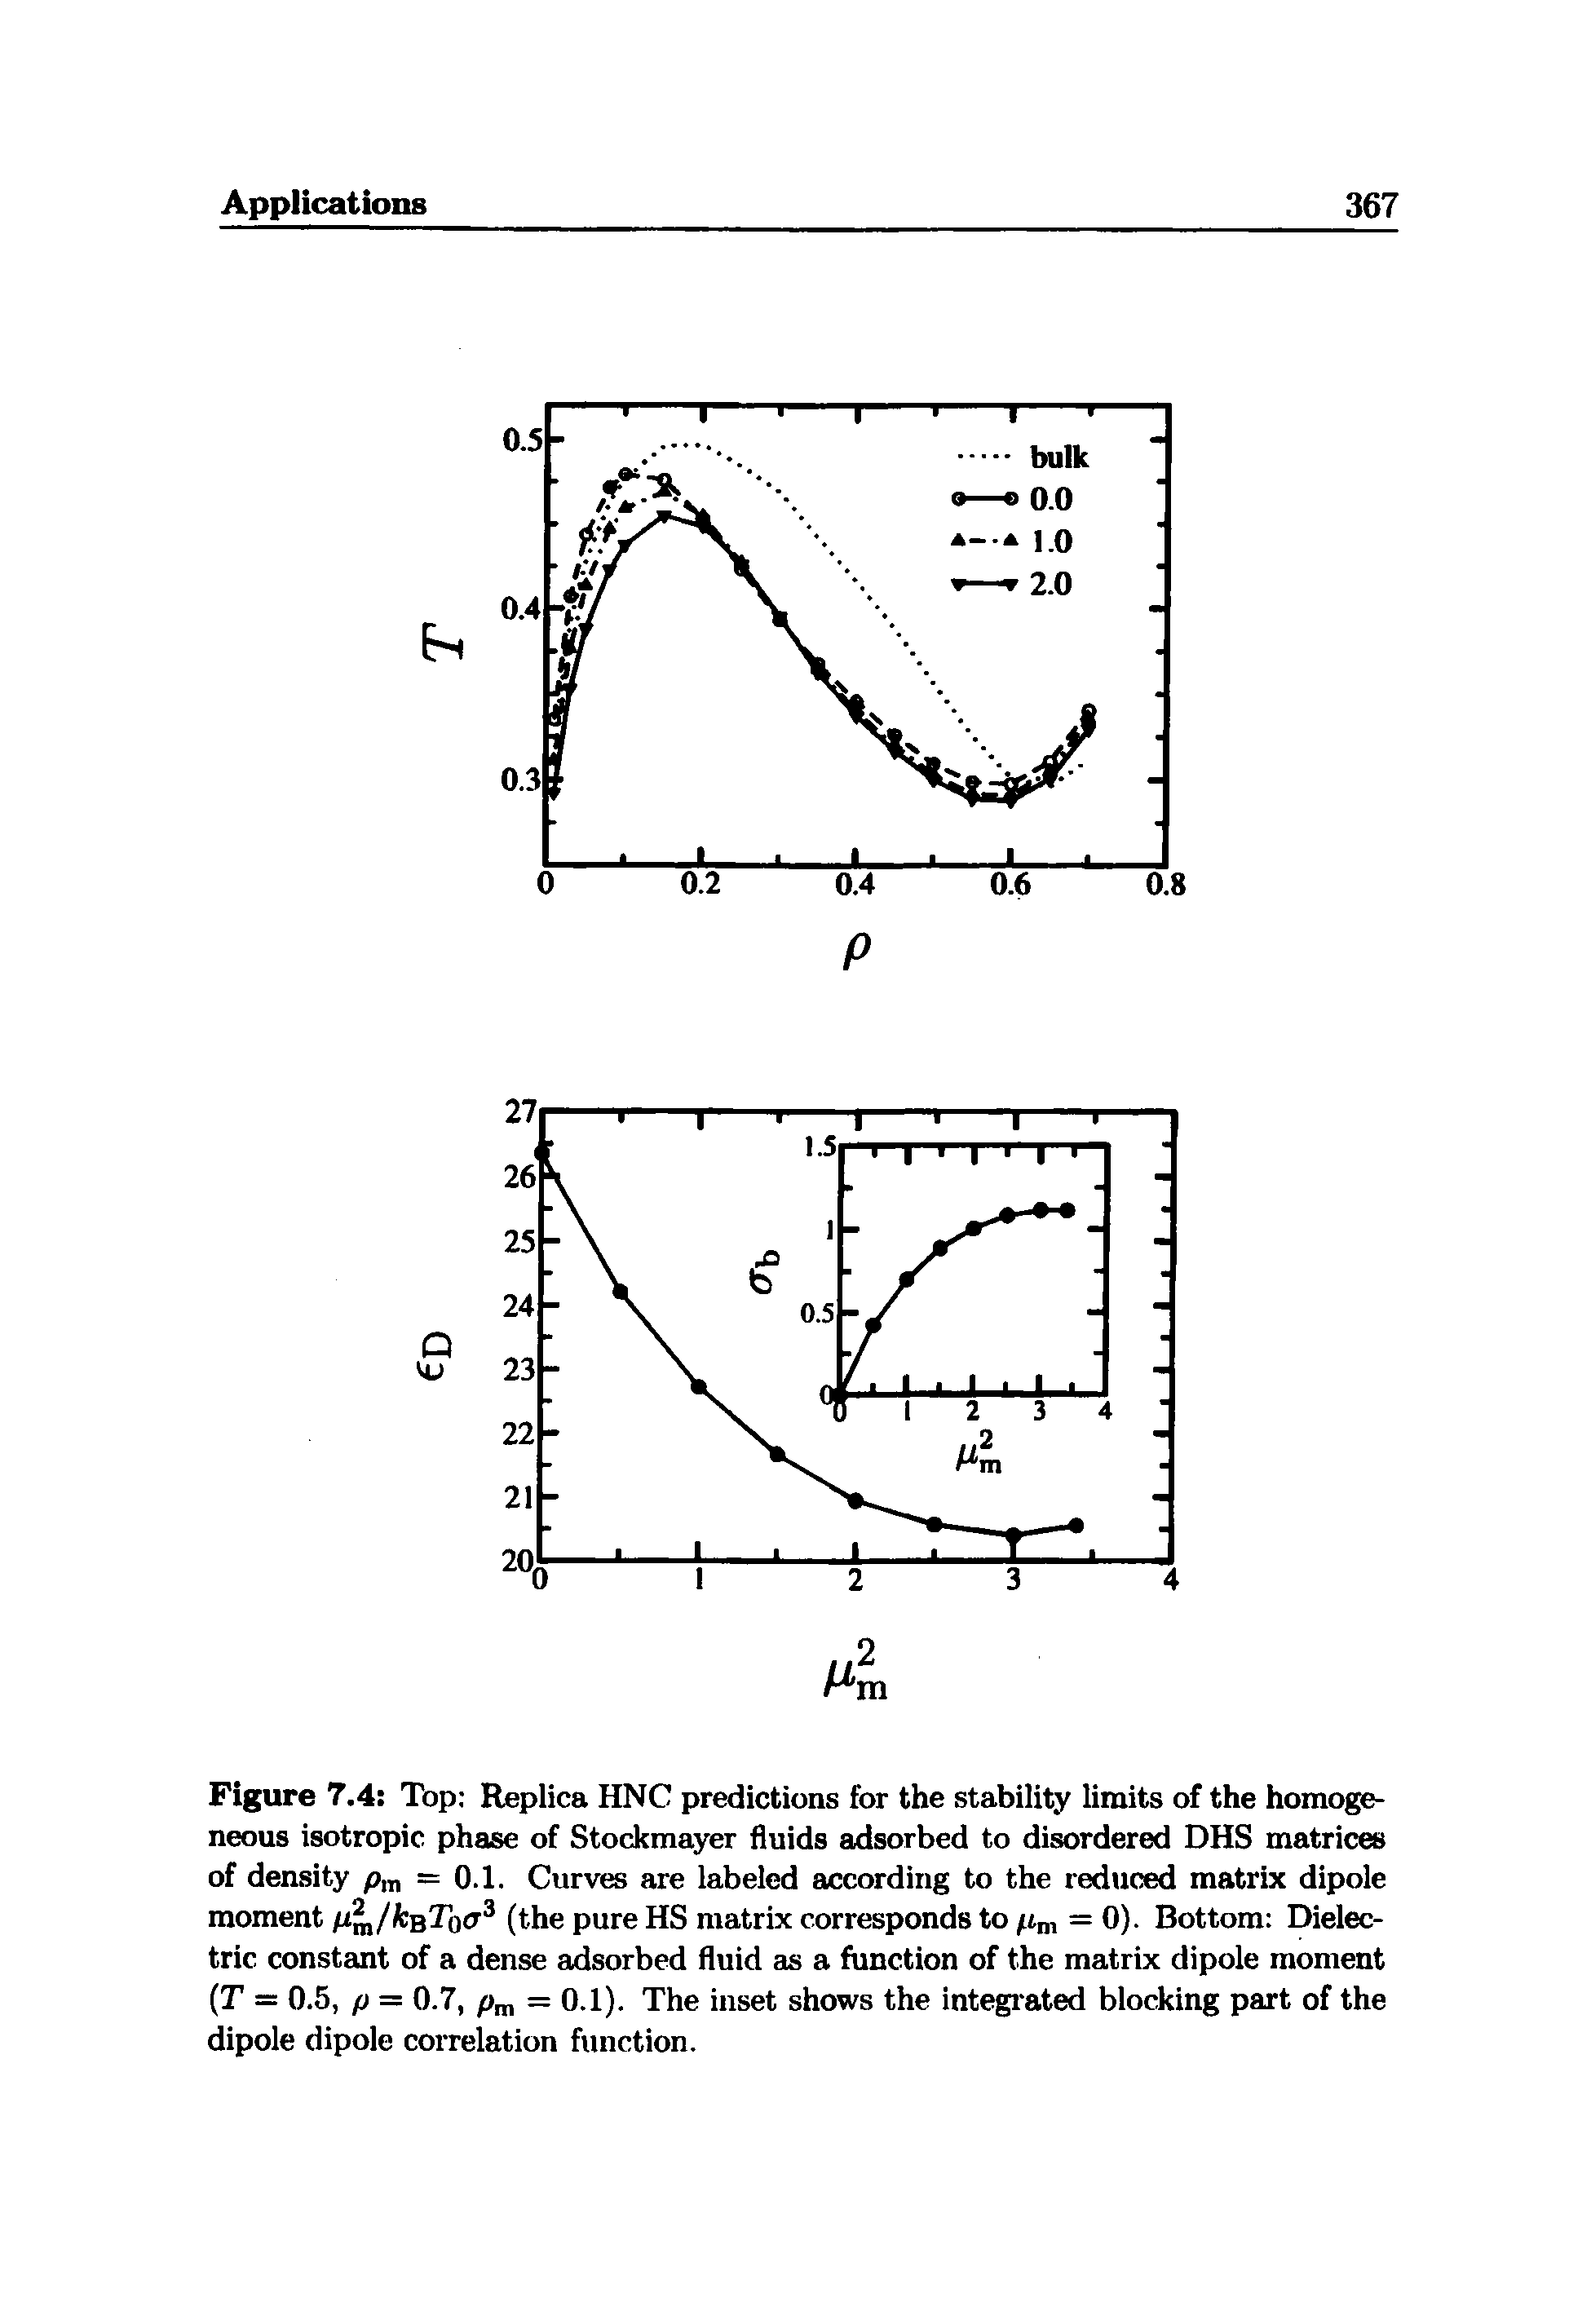 Figure 7,4 Top Replica HNC predictions for the stability limits of the homogeneous isotropic phase of Stockmayer fluids adsorbed to disordered DHS matrices of density p,n = 0.1. Curves are labeled according to the reduced matrix dipole moment fJ m/ sTocr (the pure HS matrix corresponds to = 0). Bottom Dielectric constant of a dense adsorbed fluid as a function of the matrix dipole moment T = 0.5, f) = 0.7, Pm = 0.1). The inset shows the integrated blocking part of the dipole dipole correlation function.